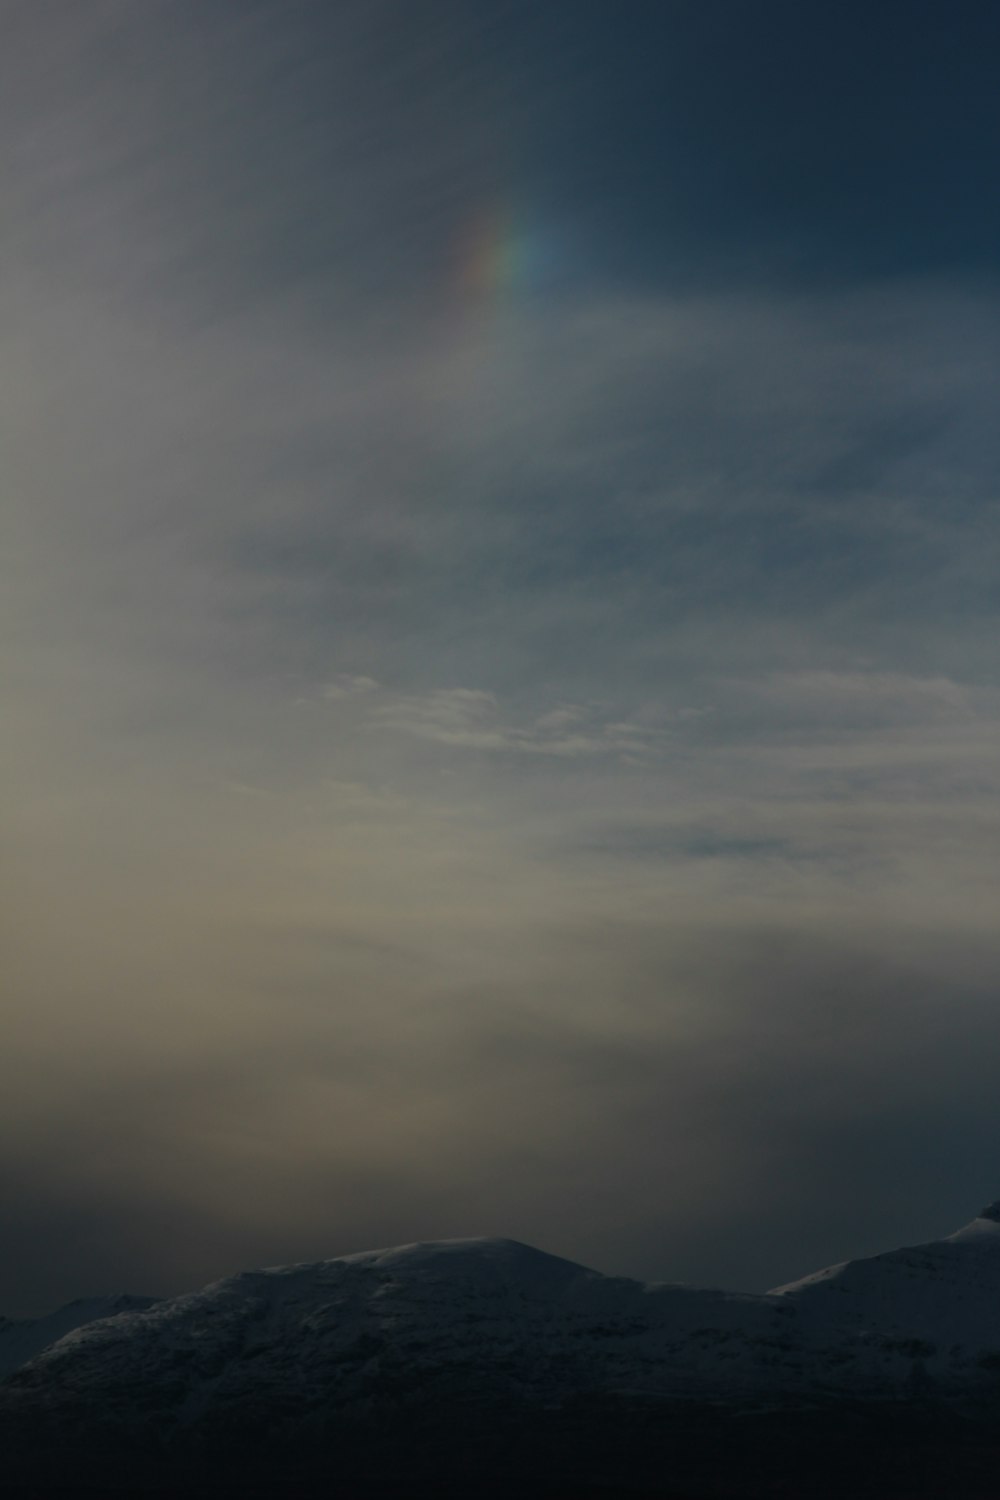 a plane flying in the sky with a rainbow in the background